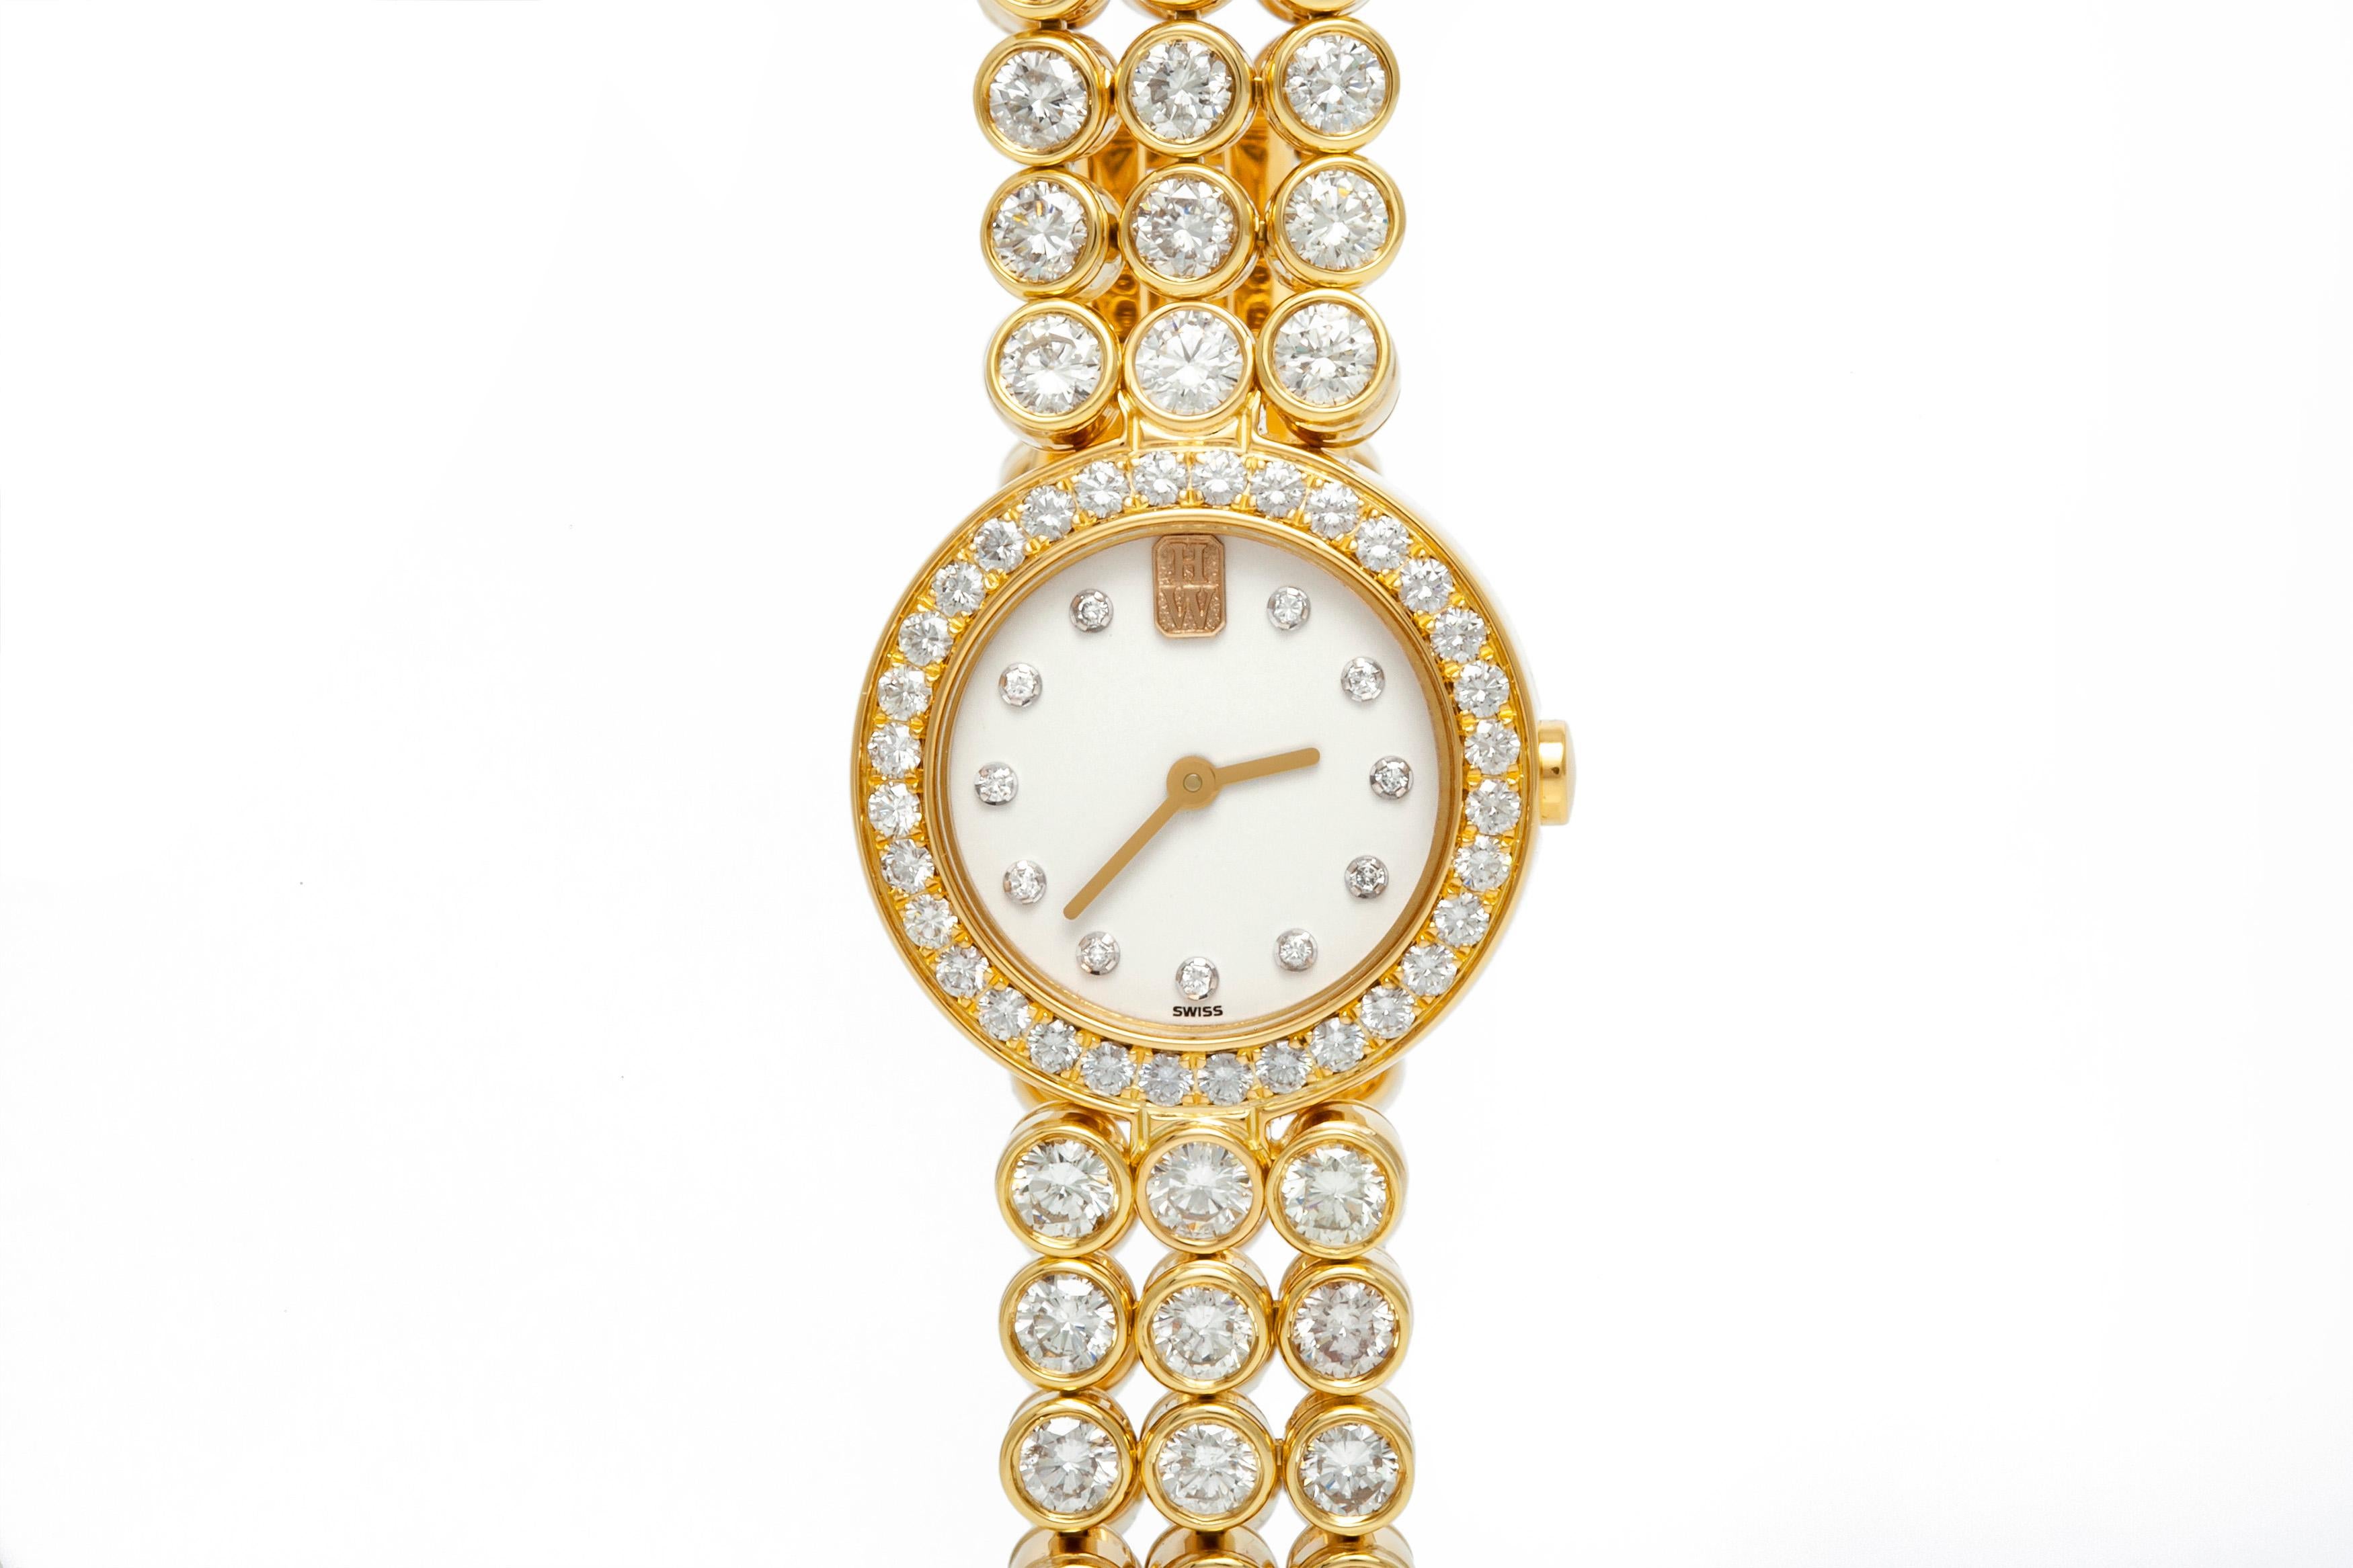 Watch signed by Harry Winston, finely crafted in 18k yellow gold with diamonds weighing approximately a total of 25.00 carat.